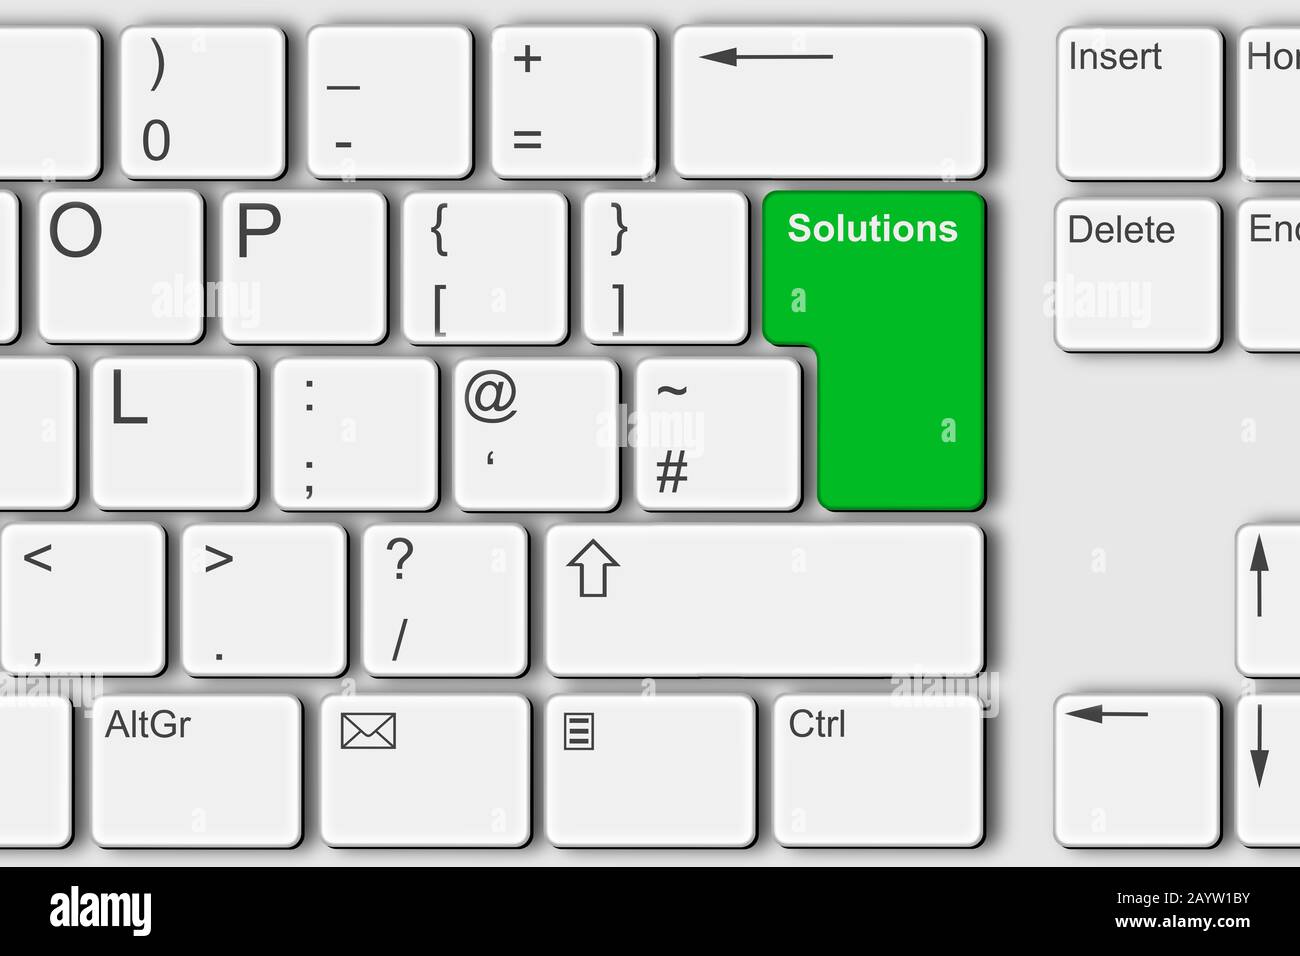 A Solutions concept PC computer keyboard illustration Stock Photo